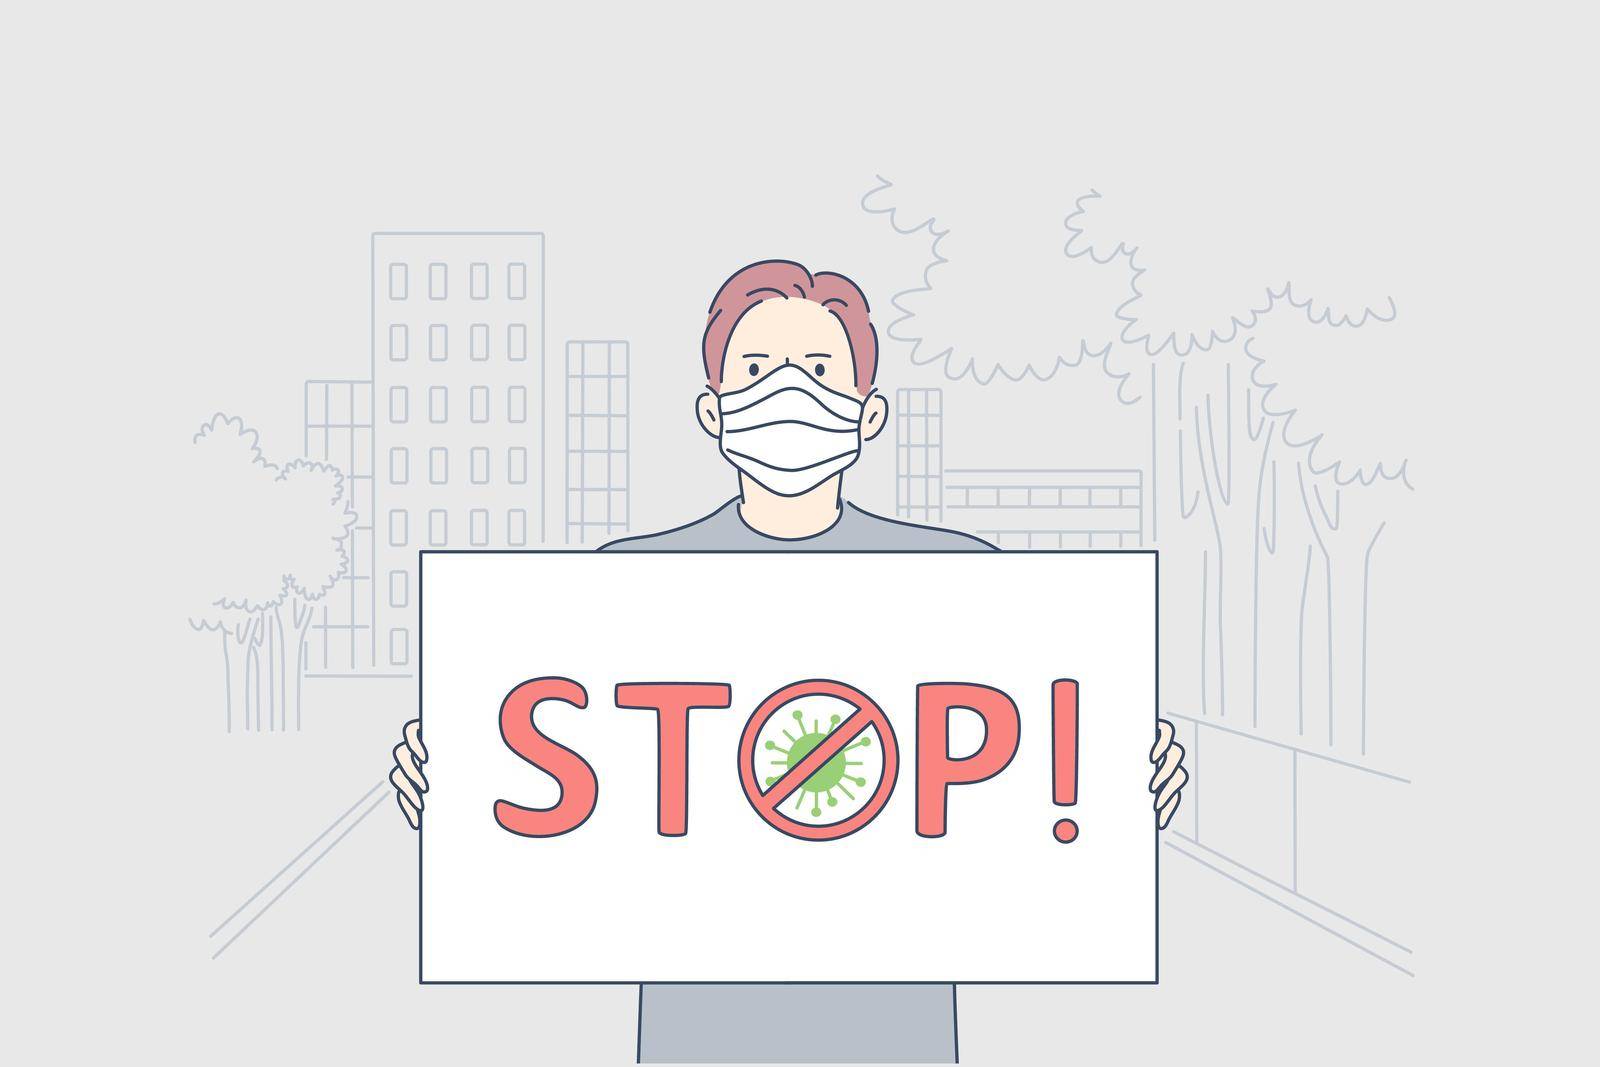 Healthcare, manifestation, infection, coronavirus, activism concept. Man activist cartoon character in medical mask with banner protest against COVID19 desease. Stop 2019ncov biohazard illustration.